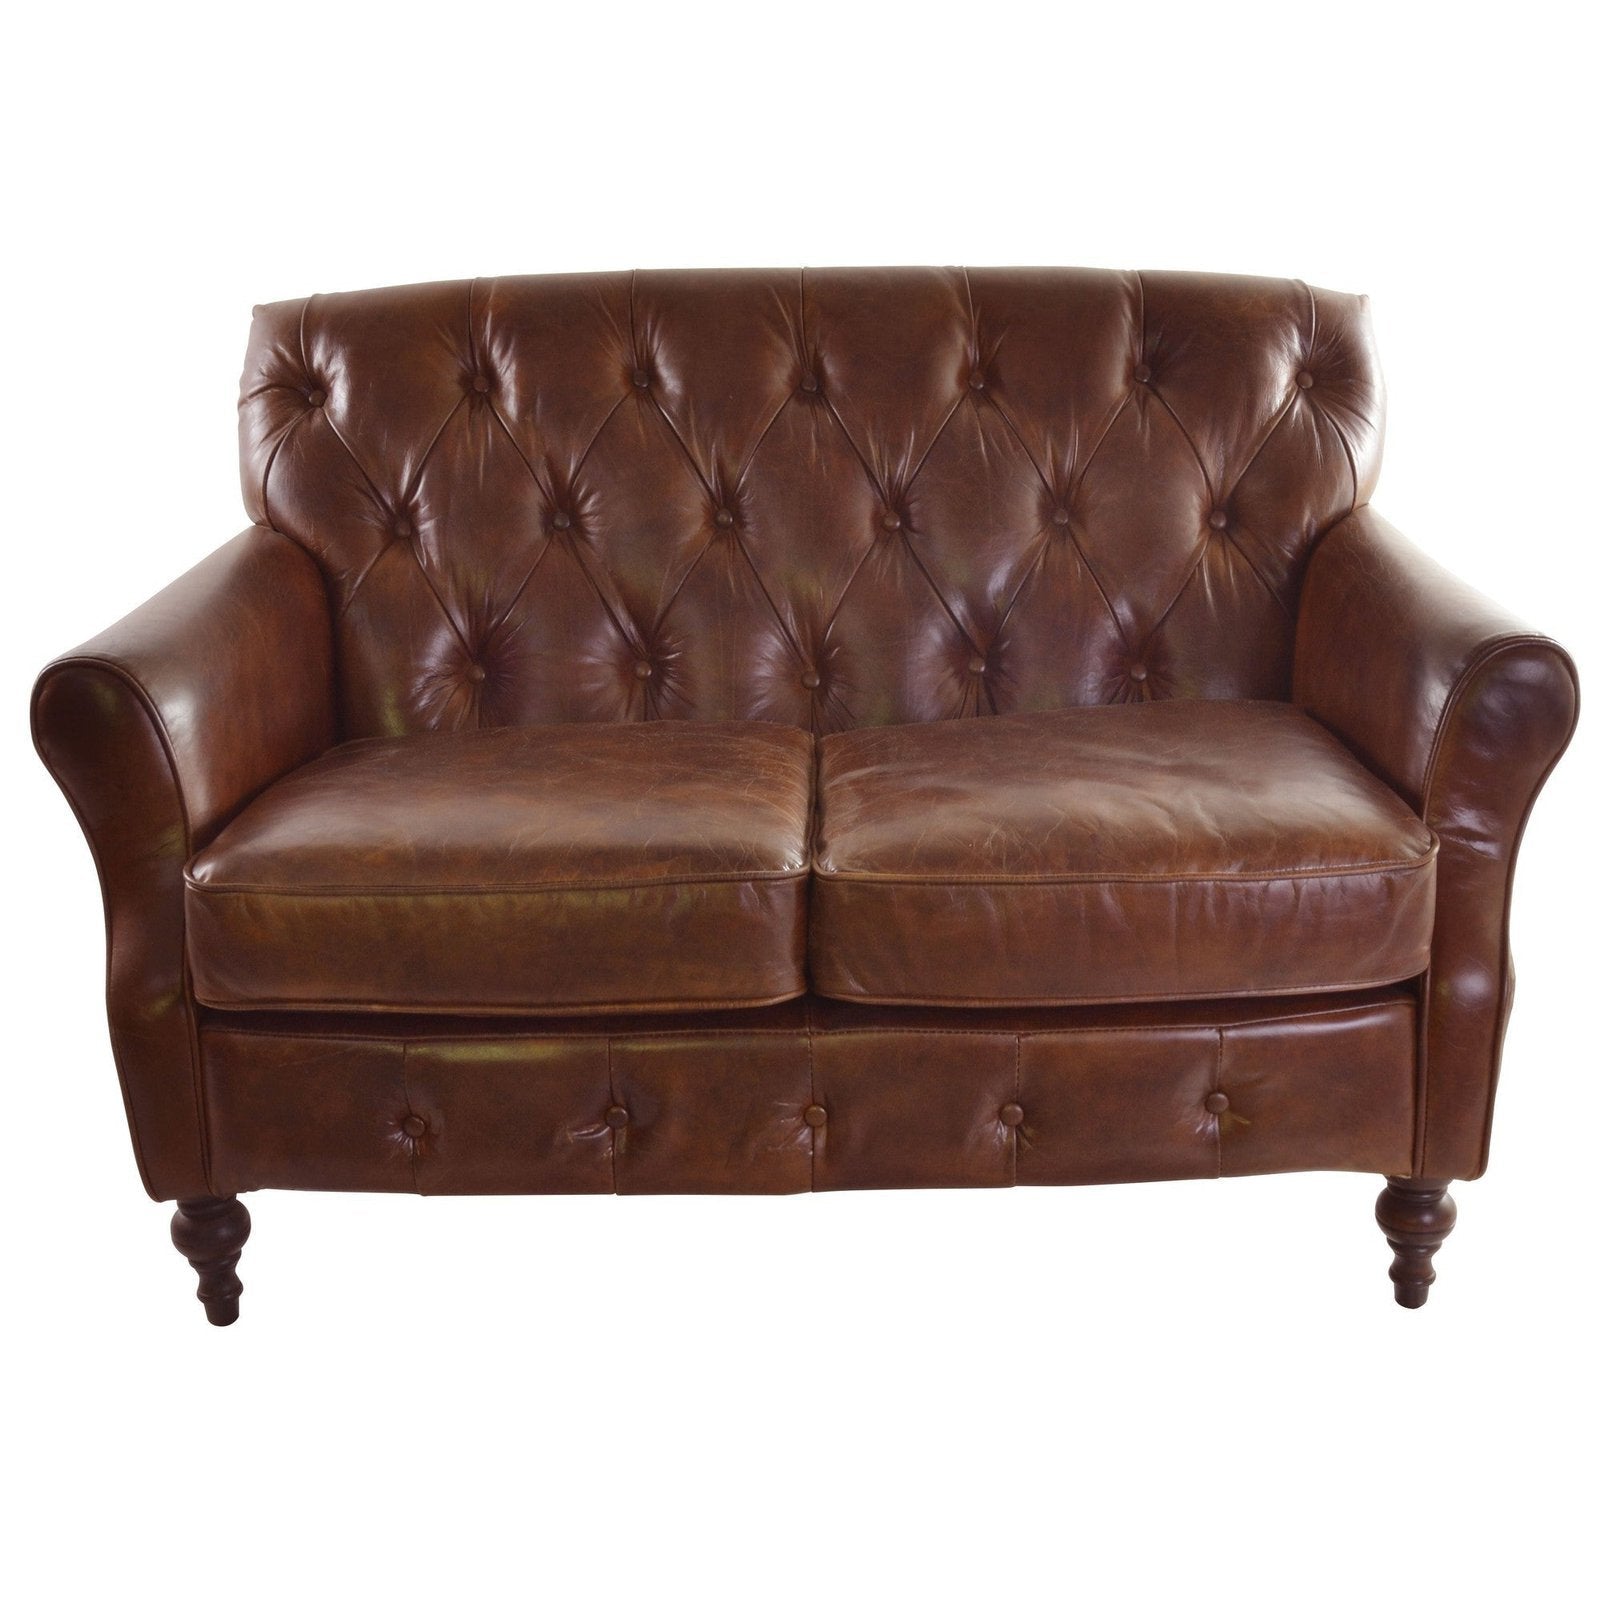 Classic Chesterfield Style Buttoned Back Sofa - Vintage Leather